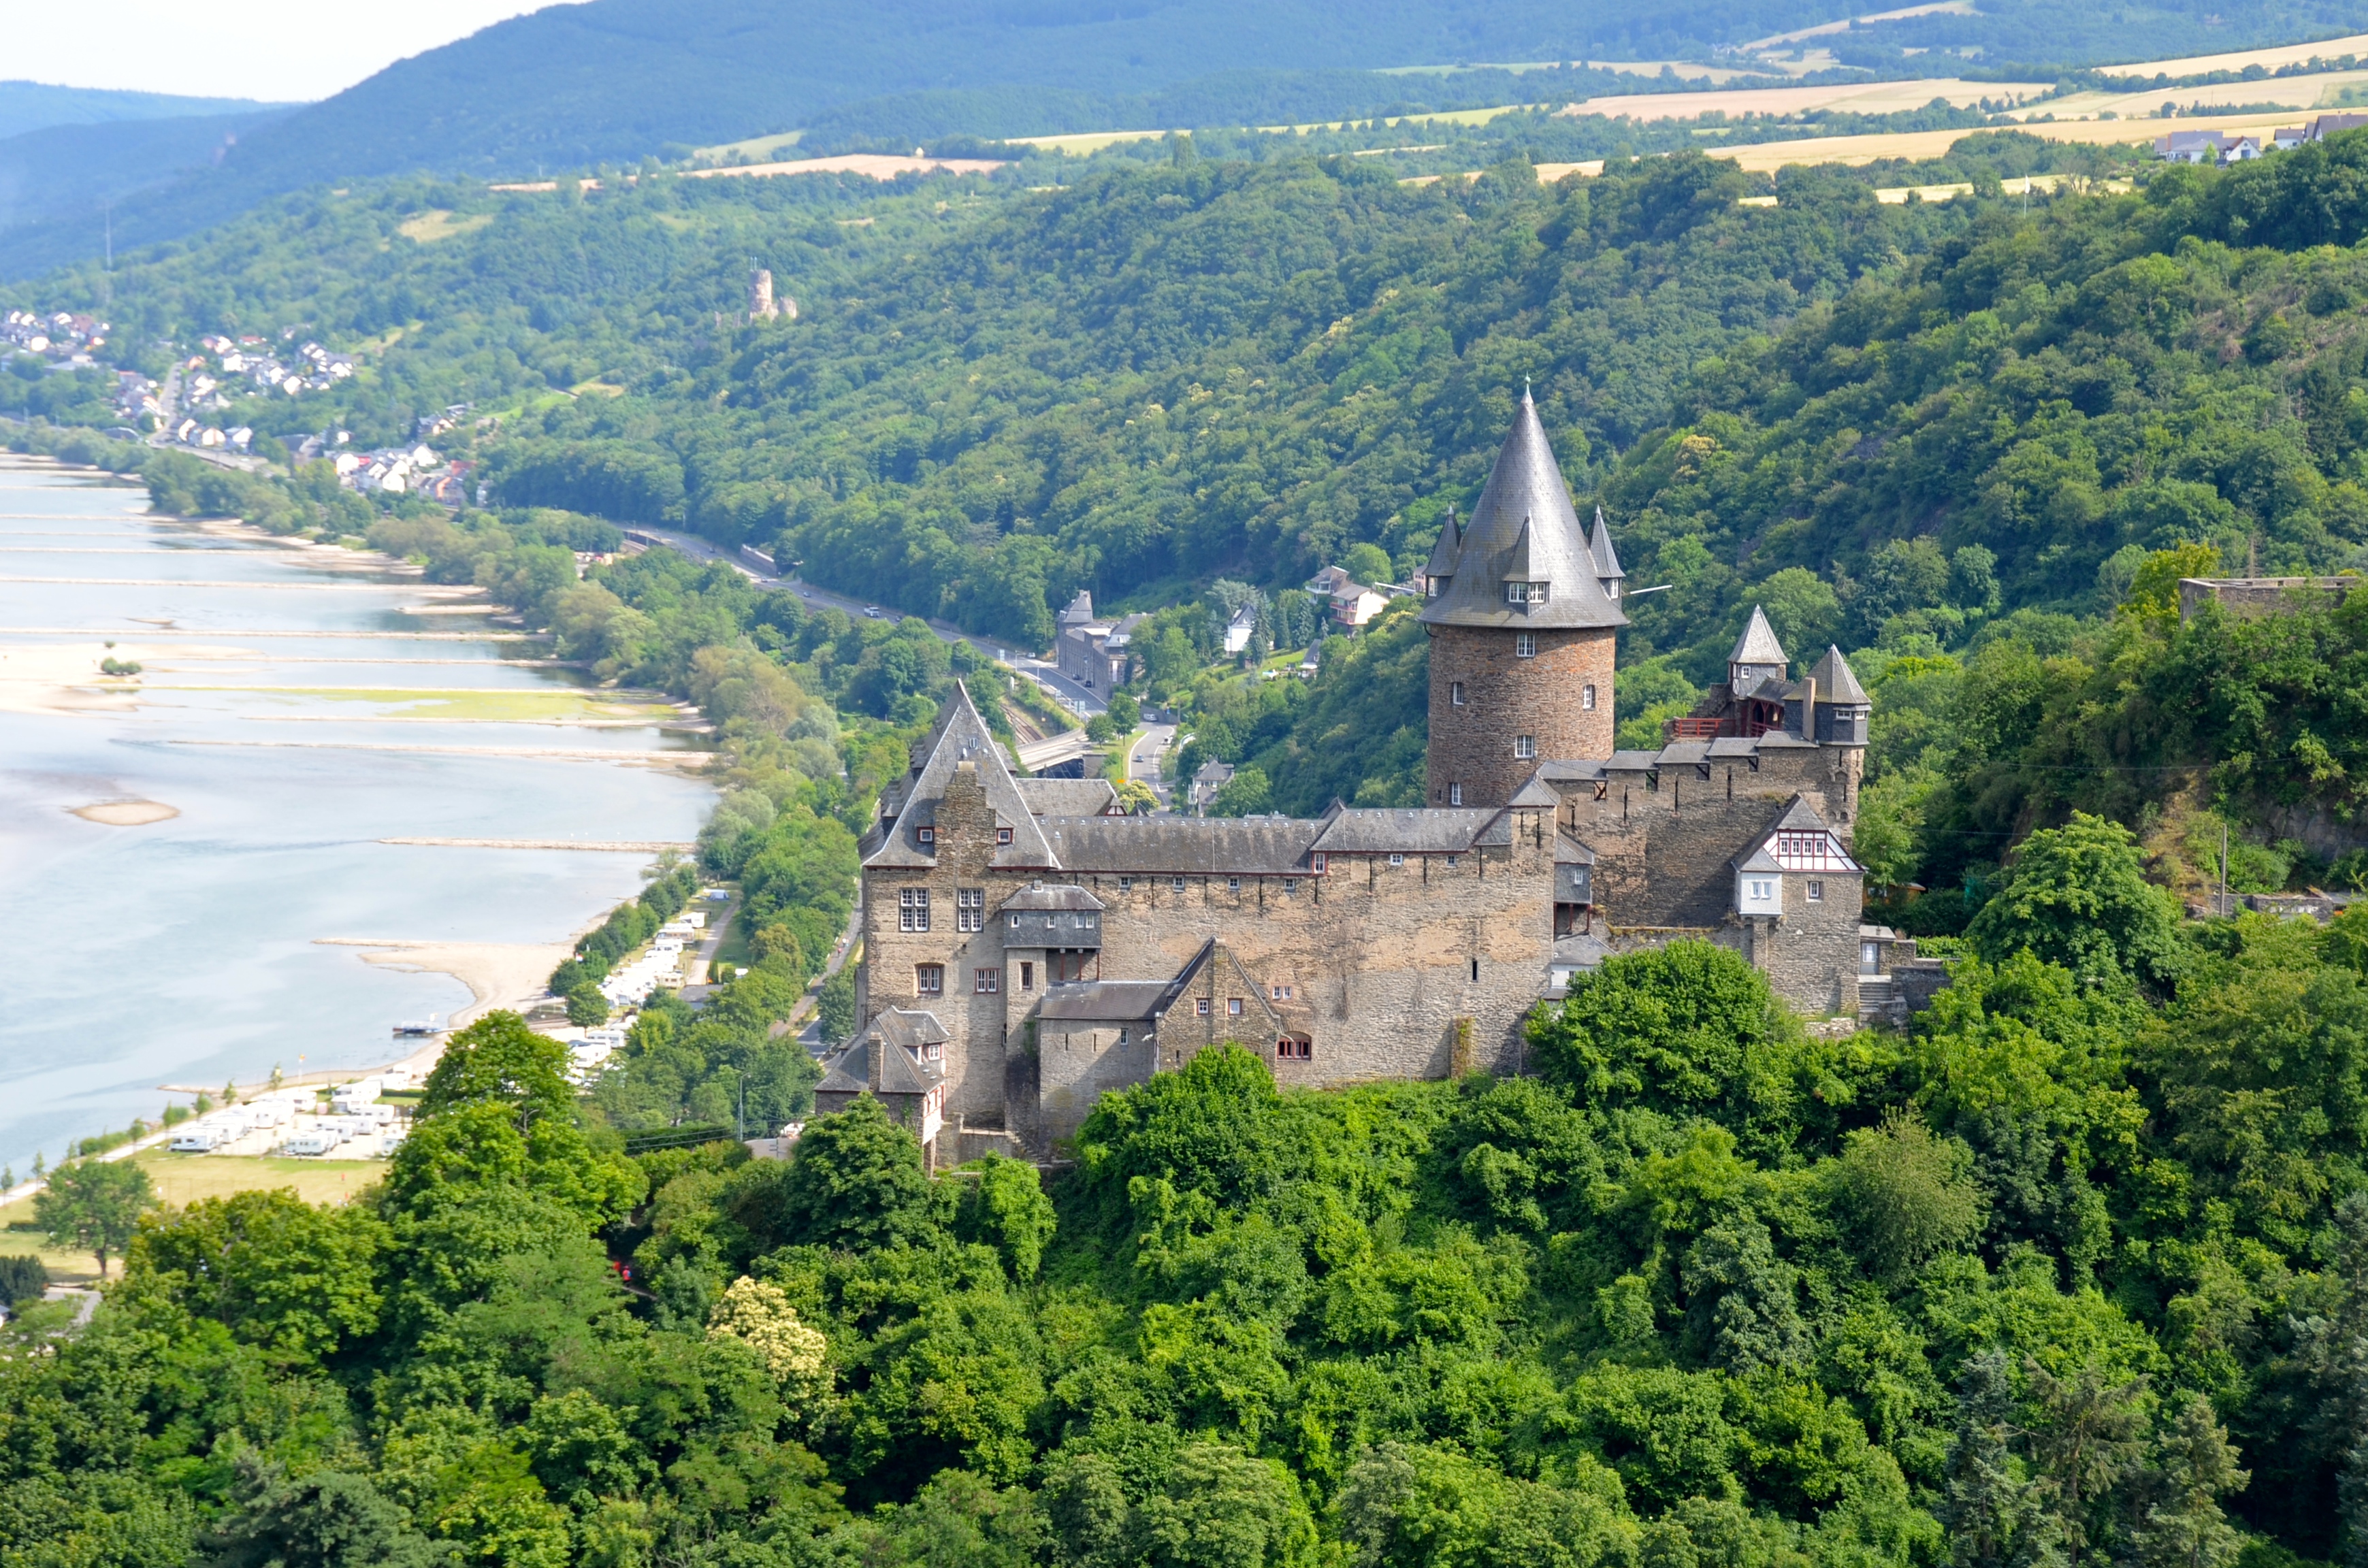 Visiting the Rhine Valley with kids - Travel Savvy Mom